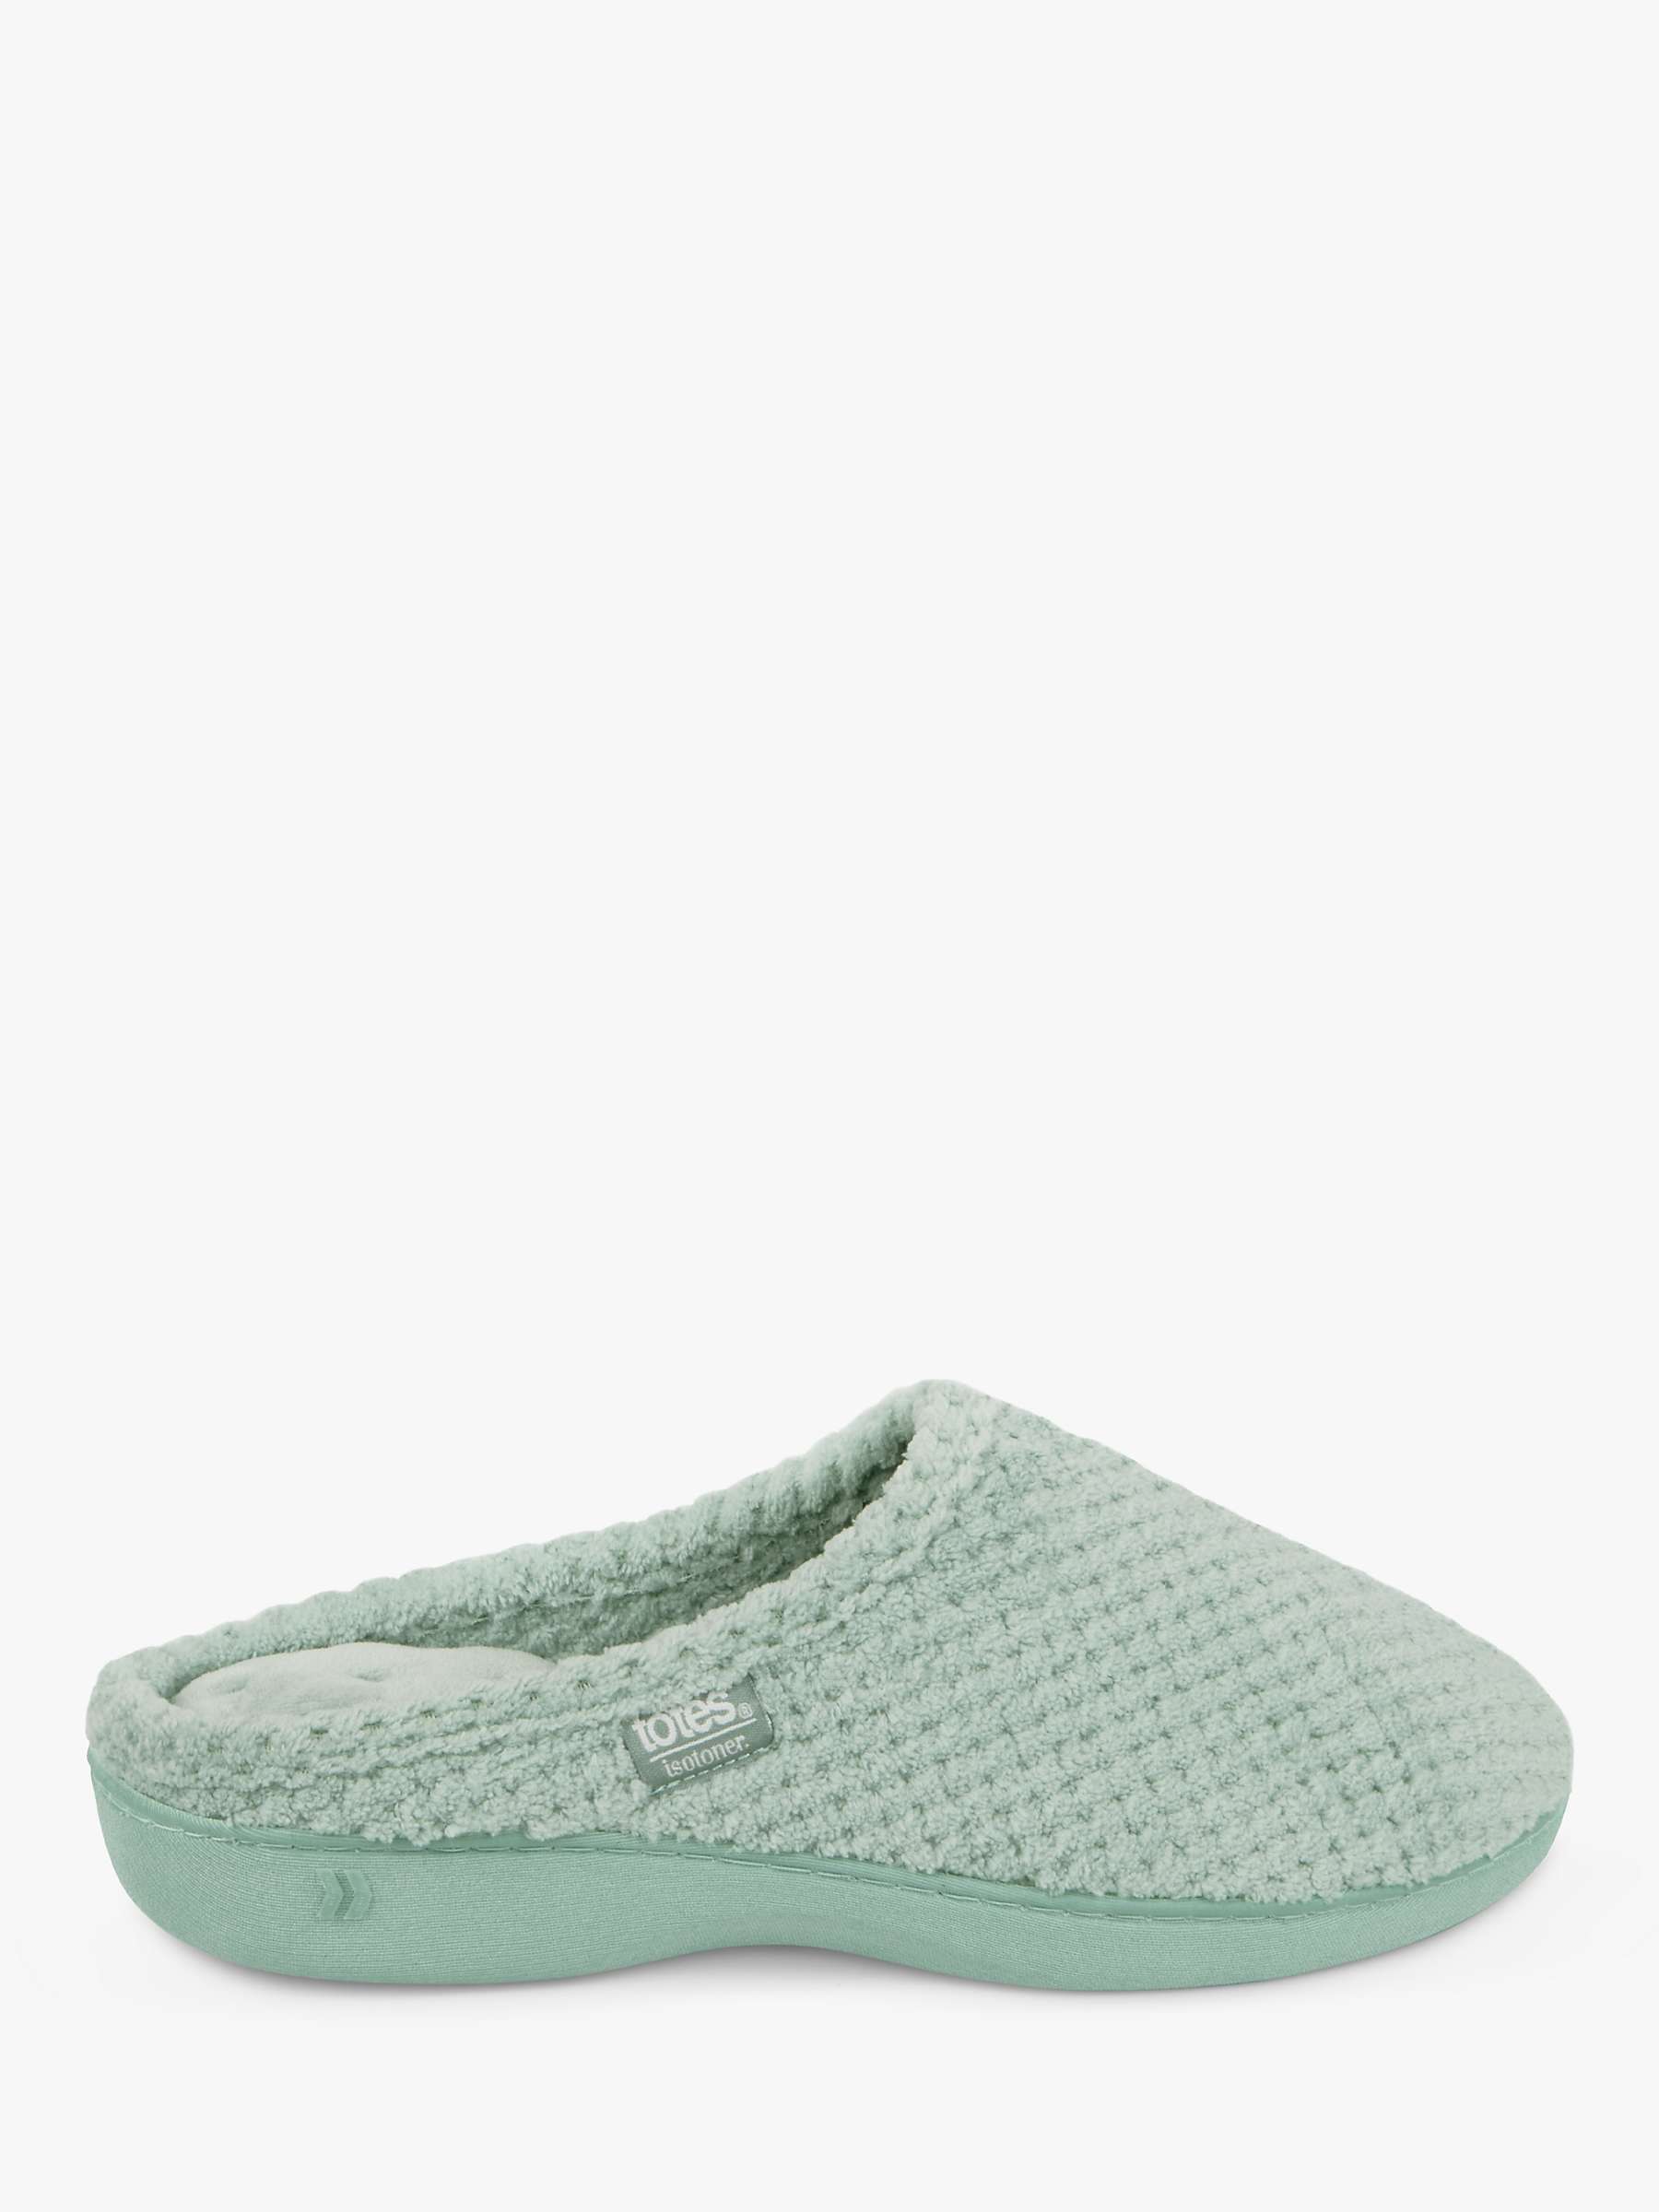 Buy totes Popcorn Terry Mule Slippers Online at johnlewis.com